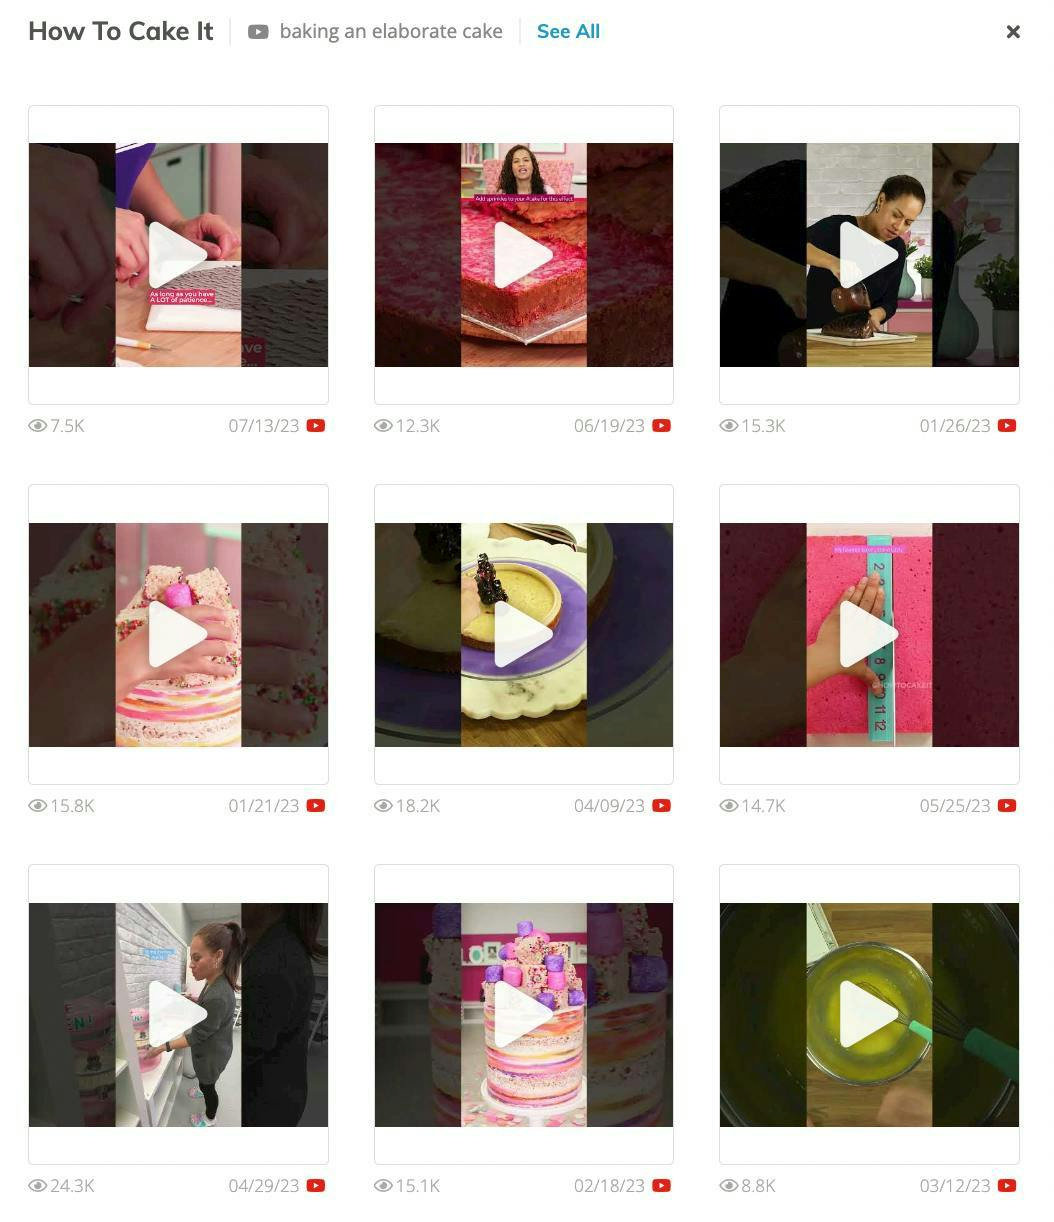 Klear: Visual Search Extended to YouTube